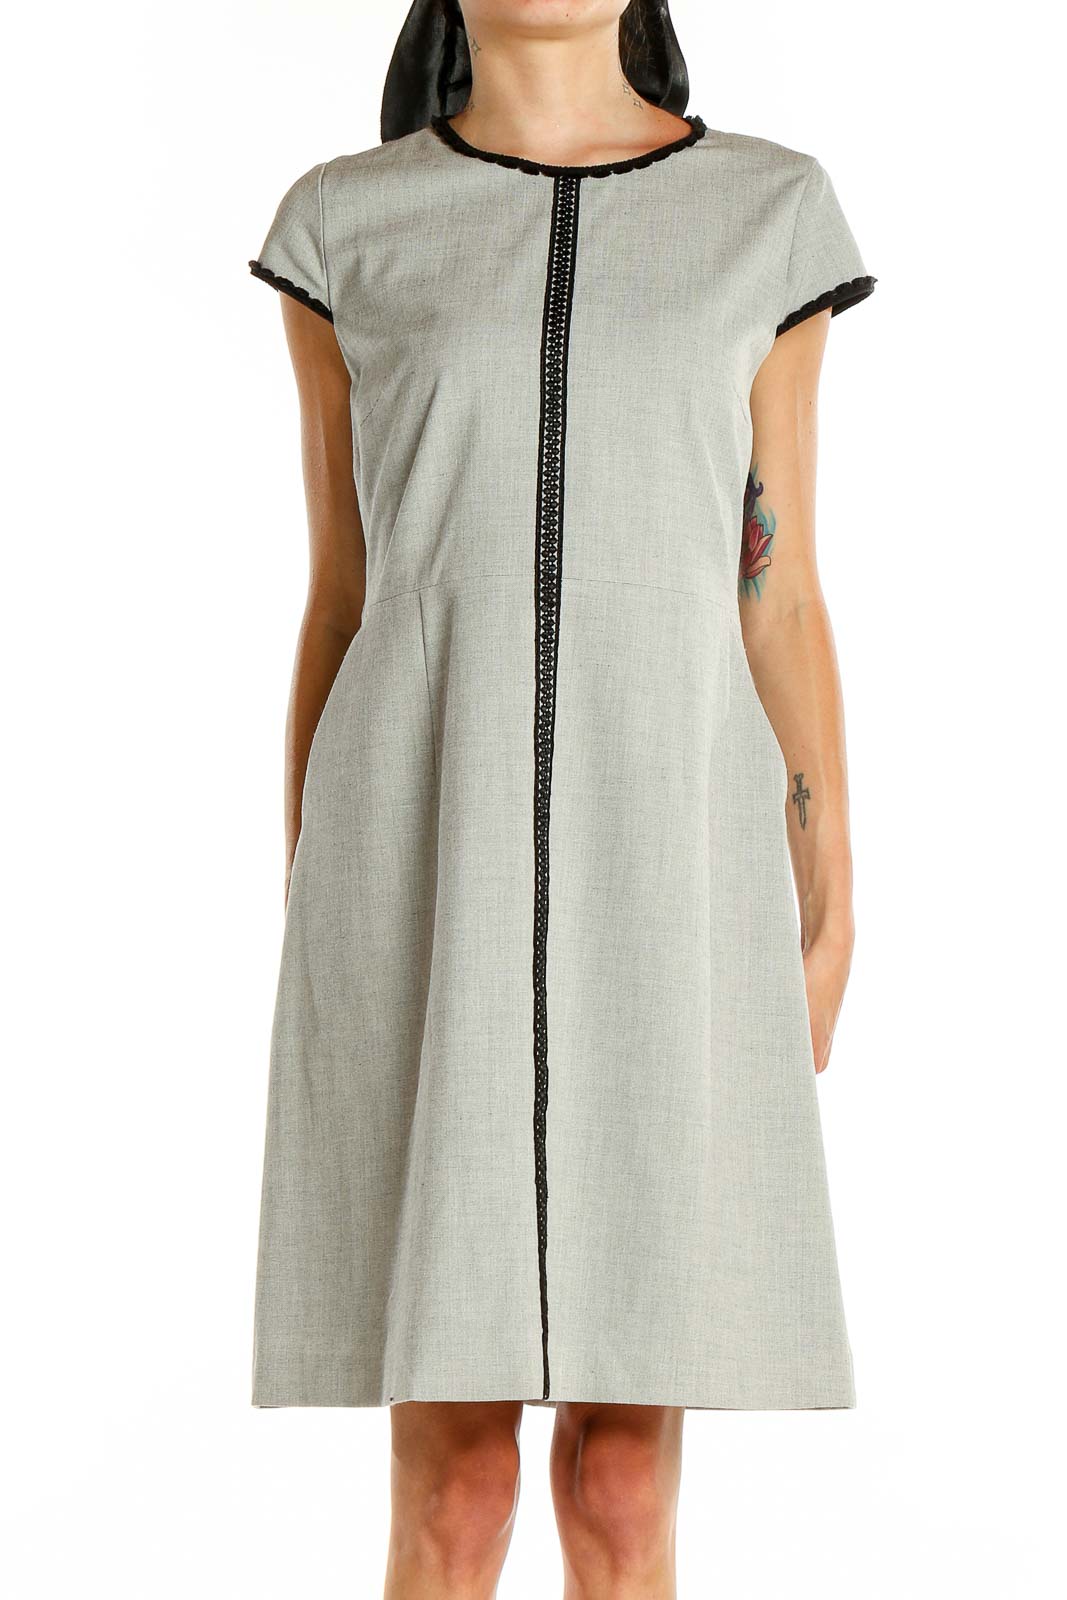 Gray Work A-Line Dress Front